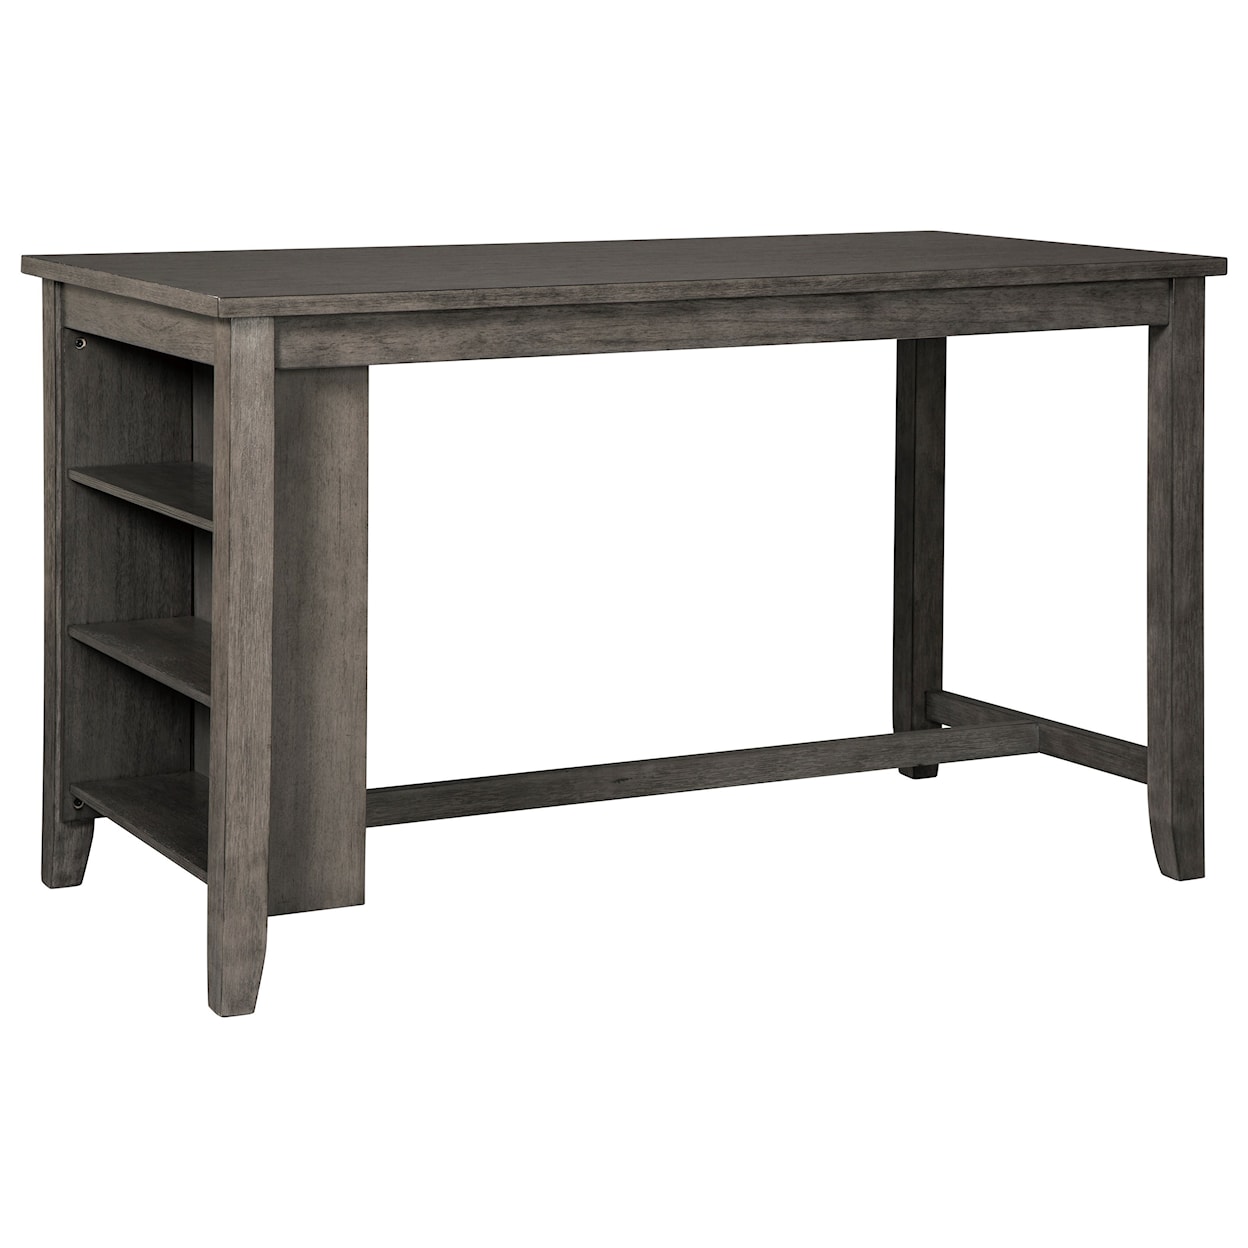 Benchcraft Caitbrook Counter Height Table